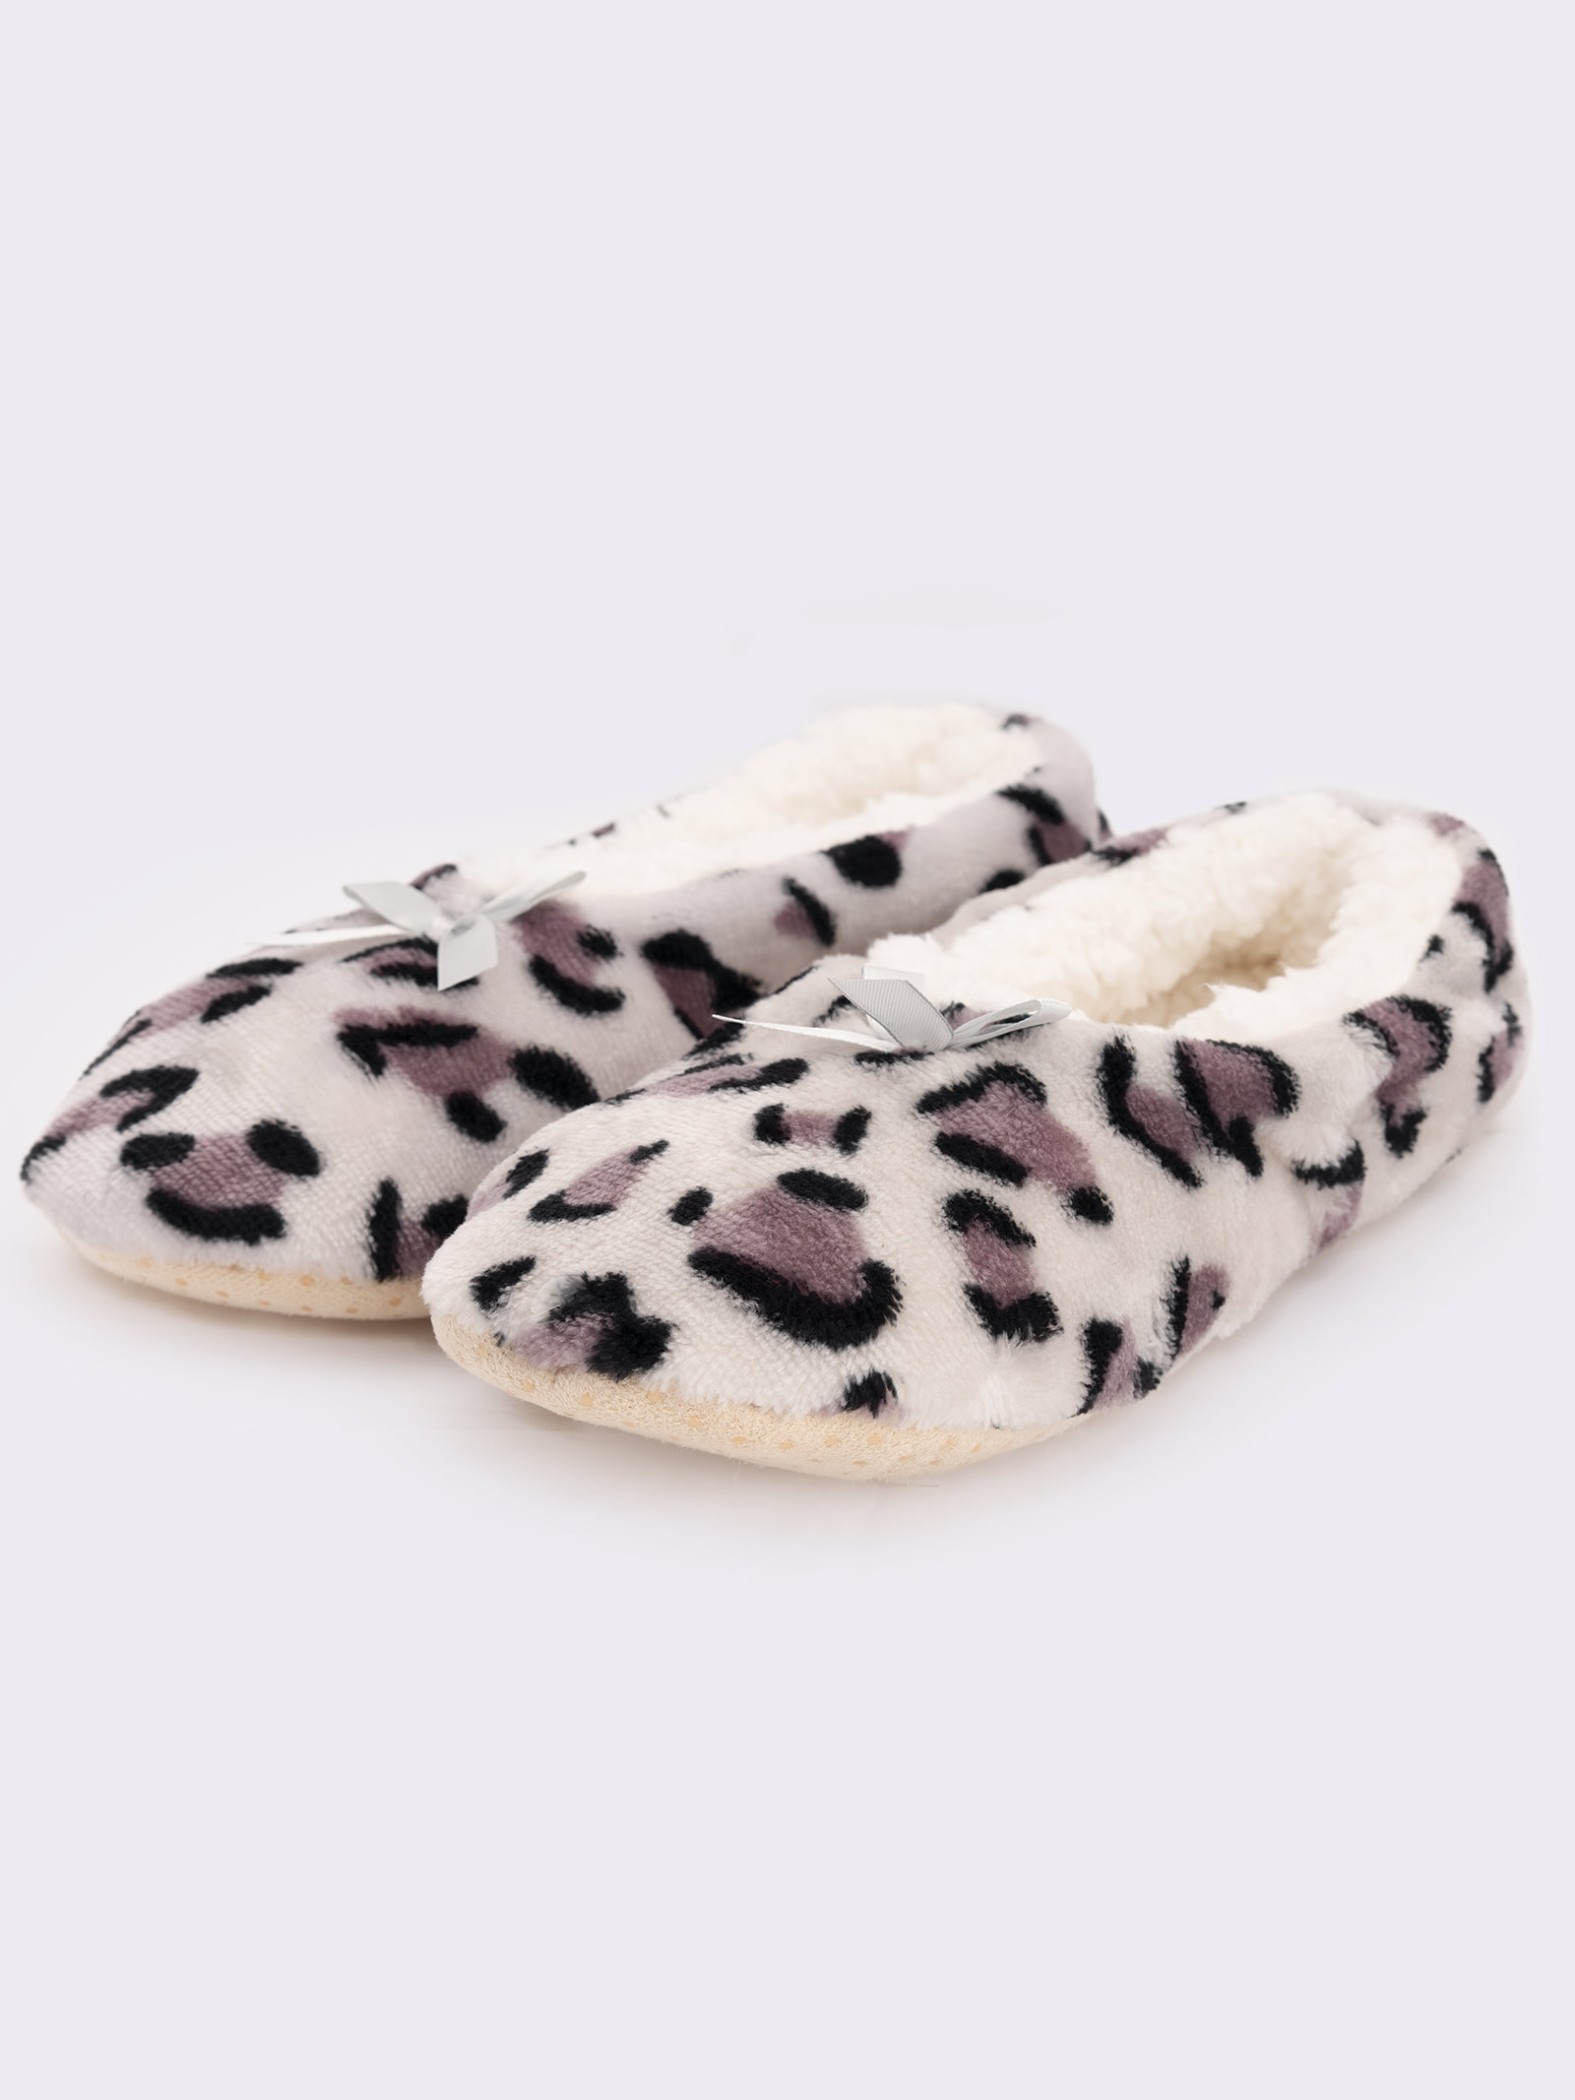 Women's animalier patterned slippers with soft interior